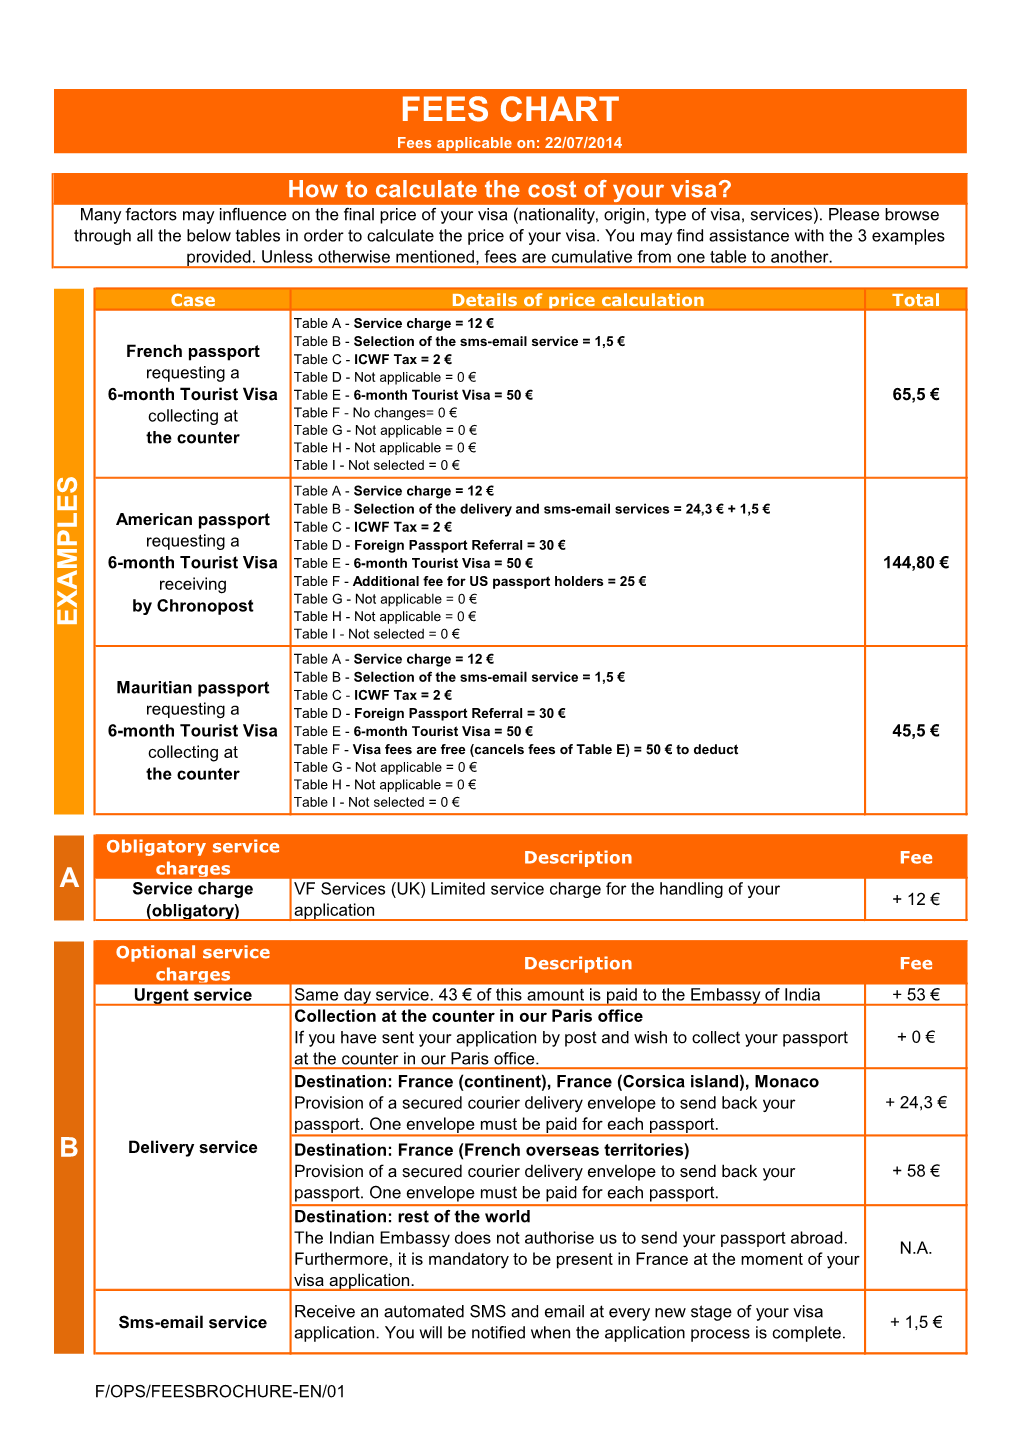 FEES CHART Fees Applicable On: 22/07/2014